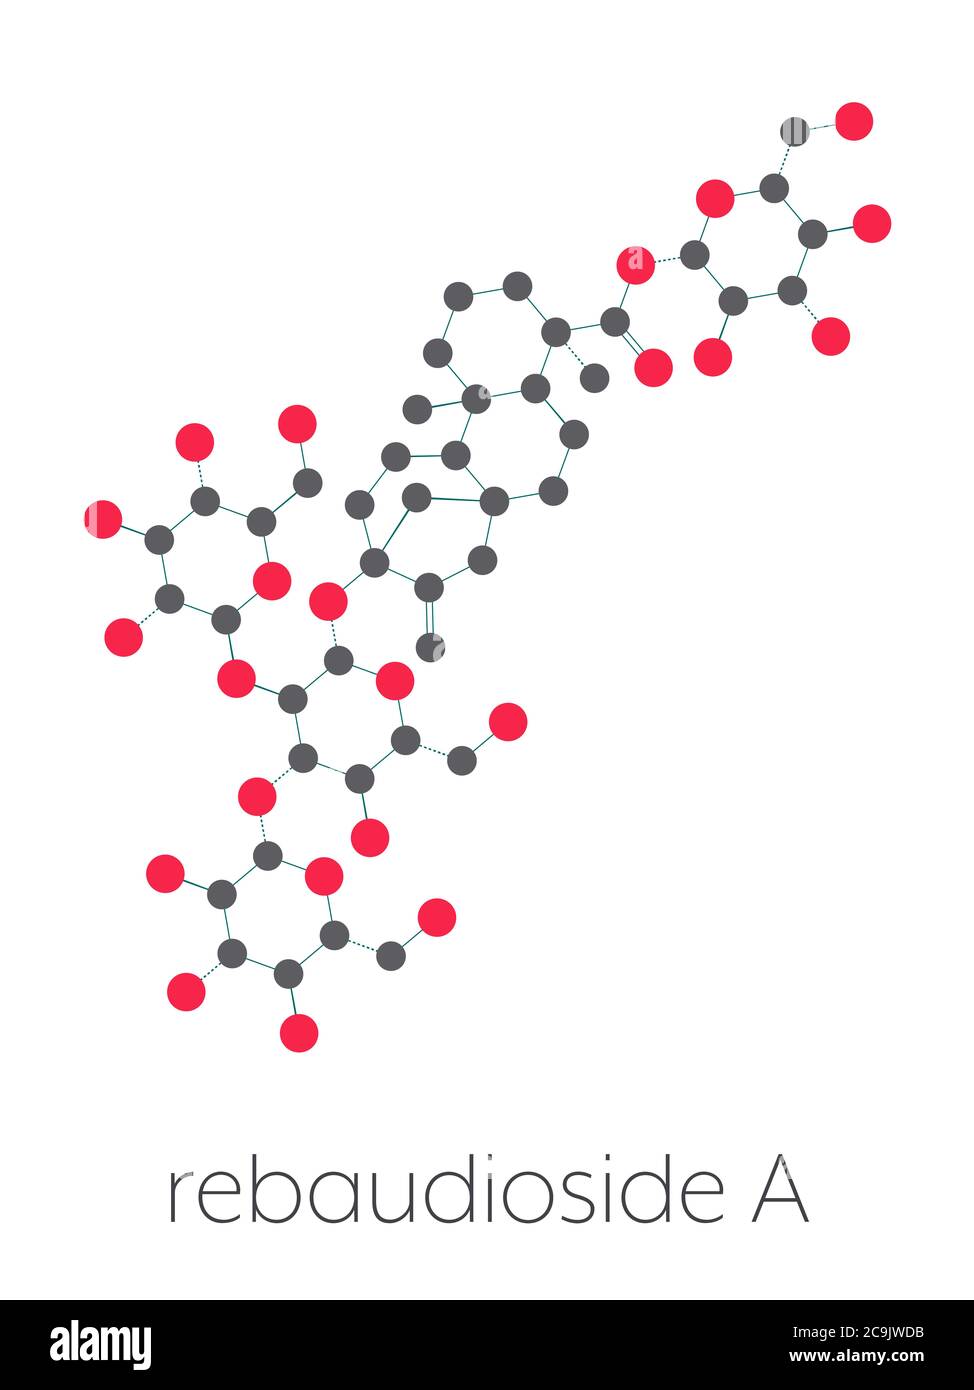 Rebaudioside A molecule. One of the main steviol glycosides found in stevia plants, used as sweetener. Stylized skeletal formula (chemical structure). Stock Photo